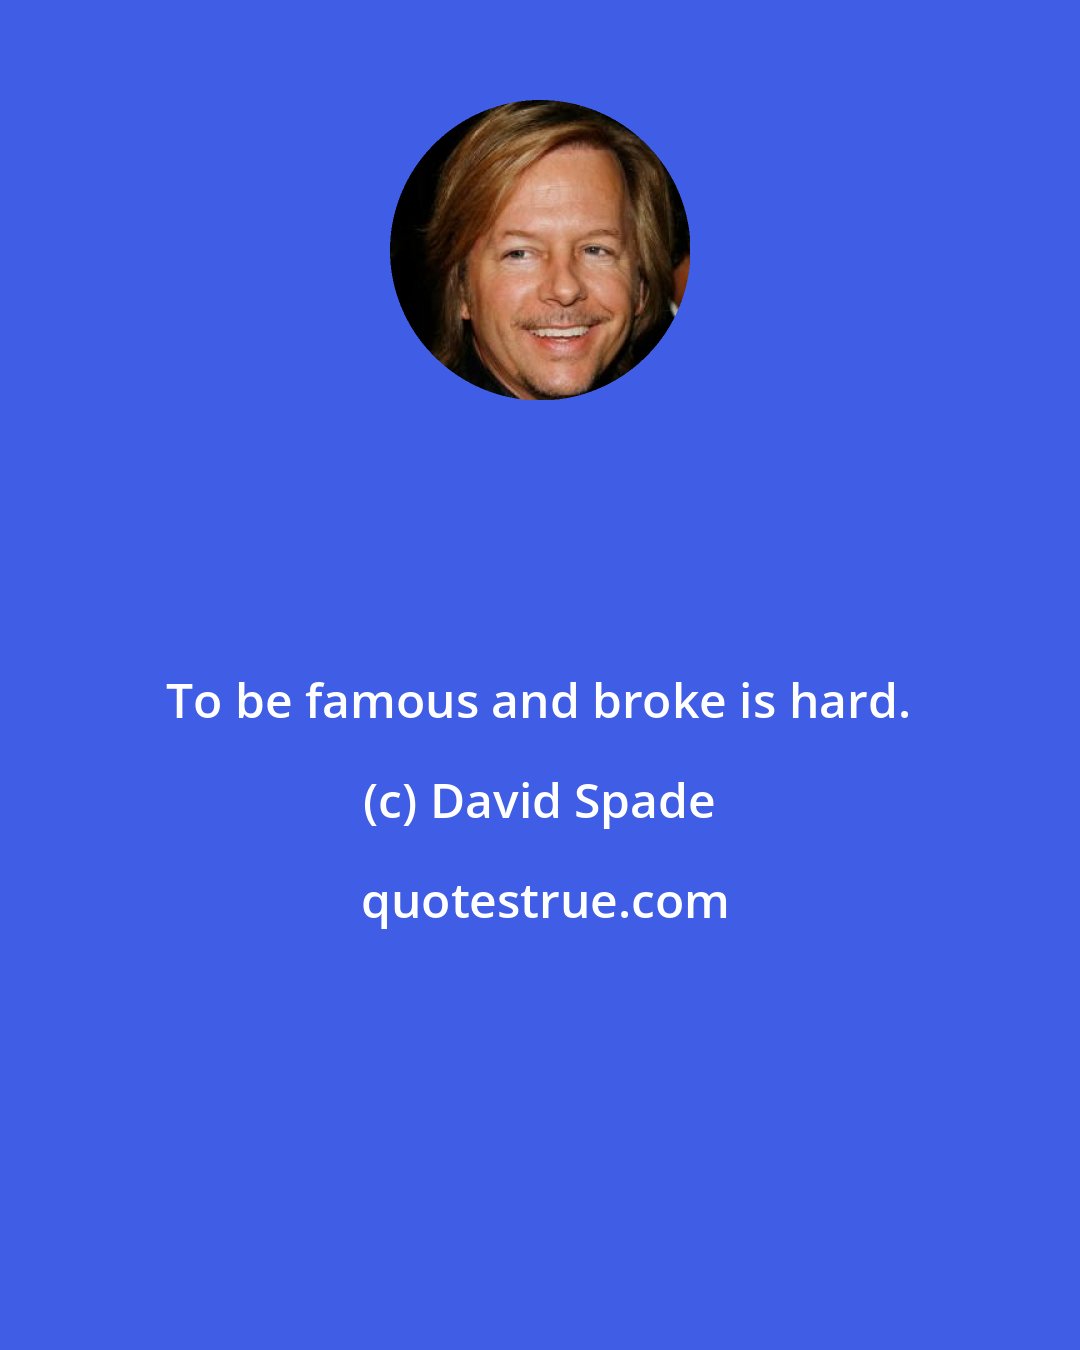 David Spade: To be famous and broke is hard.